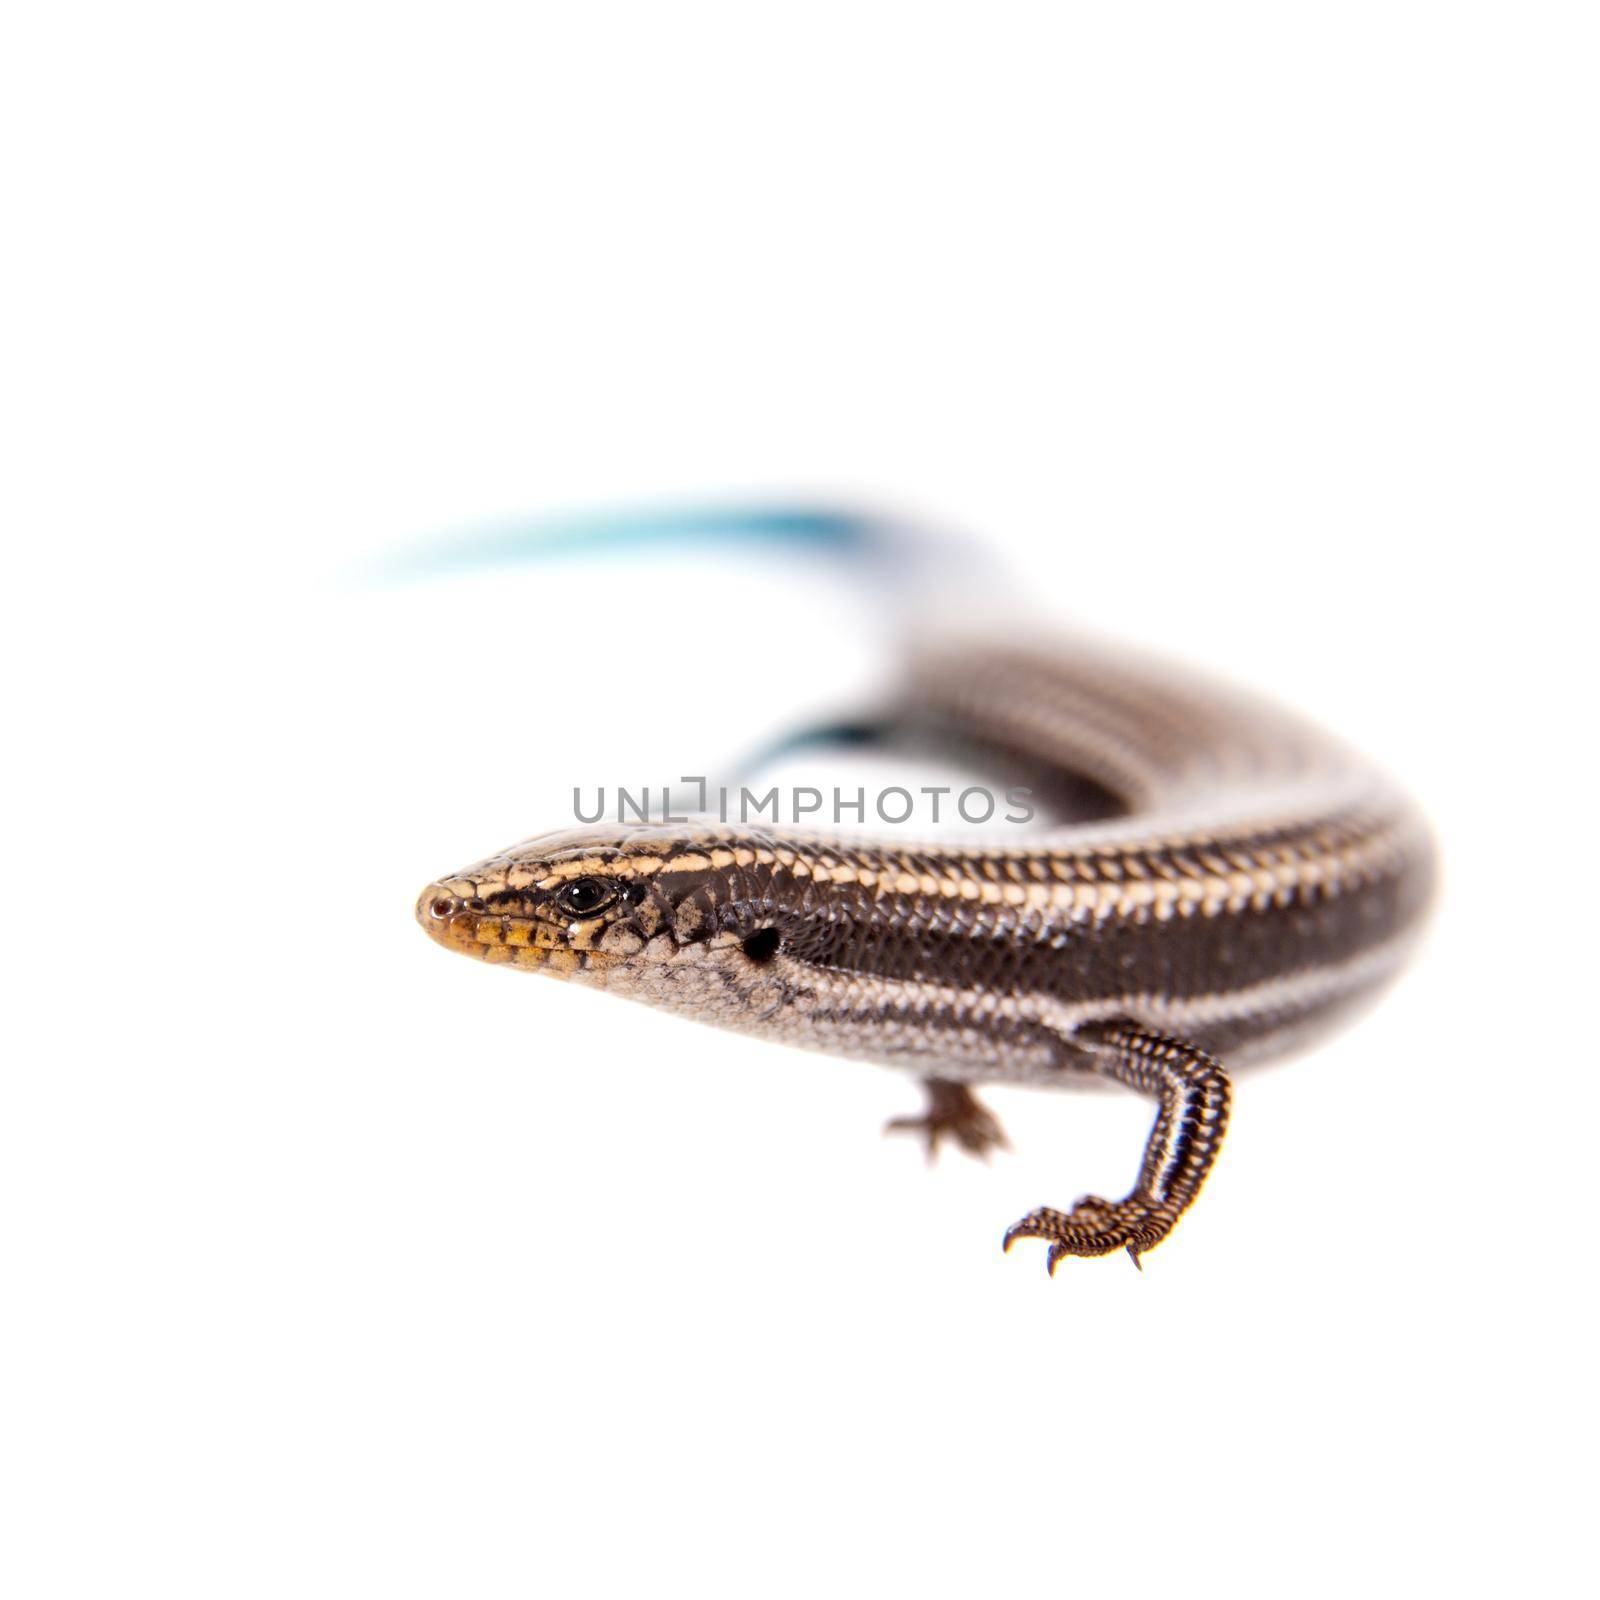 Gran Canaria skink, on white by RosaJay